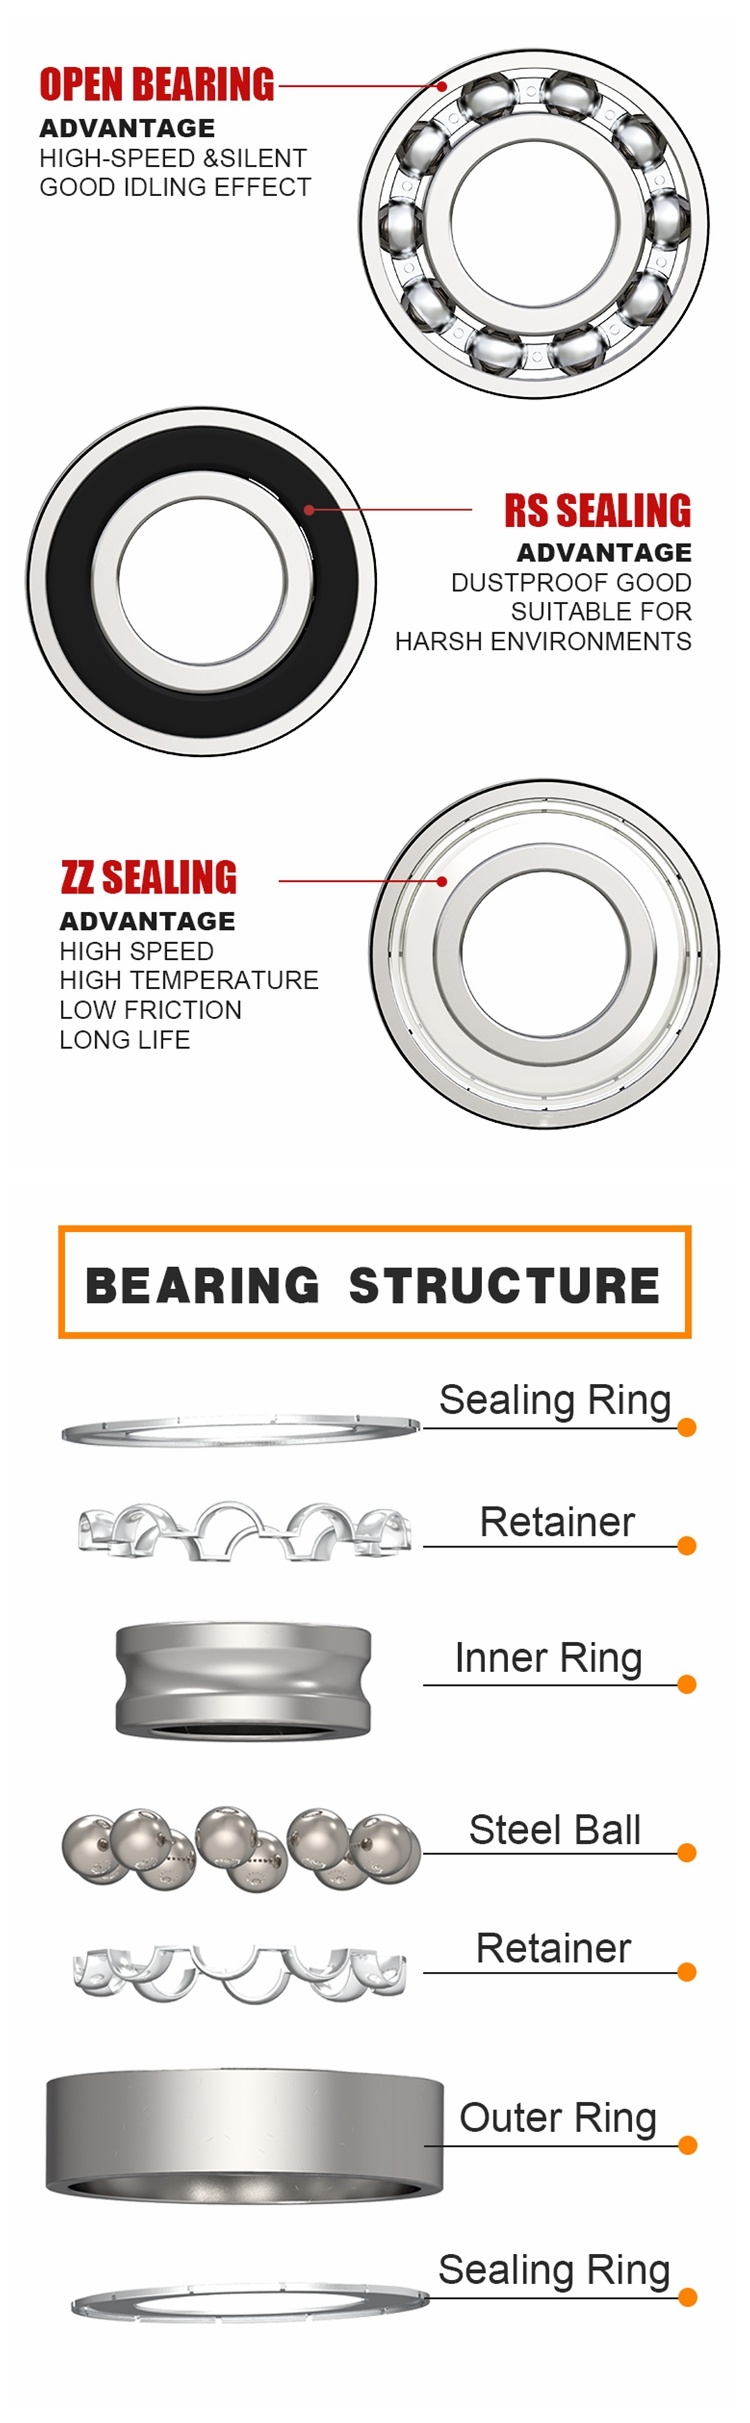 ABEC-5 Auto Parts Z2 V2 6968 RS Deep Groove Ball Bearings